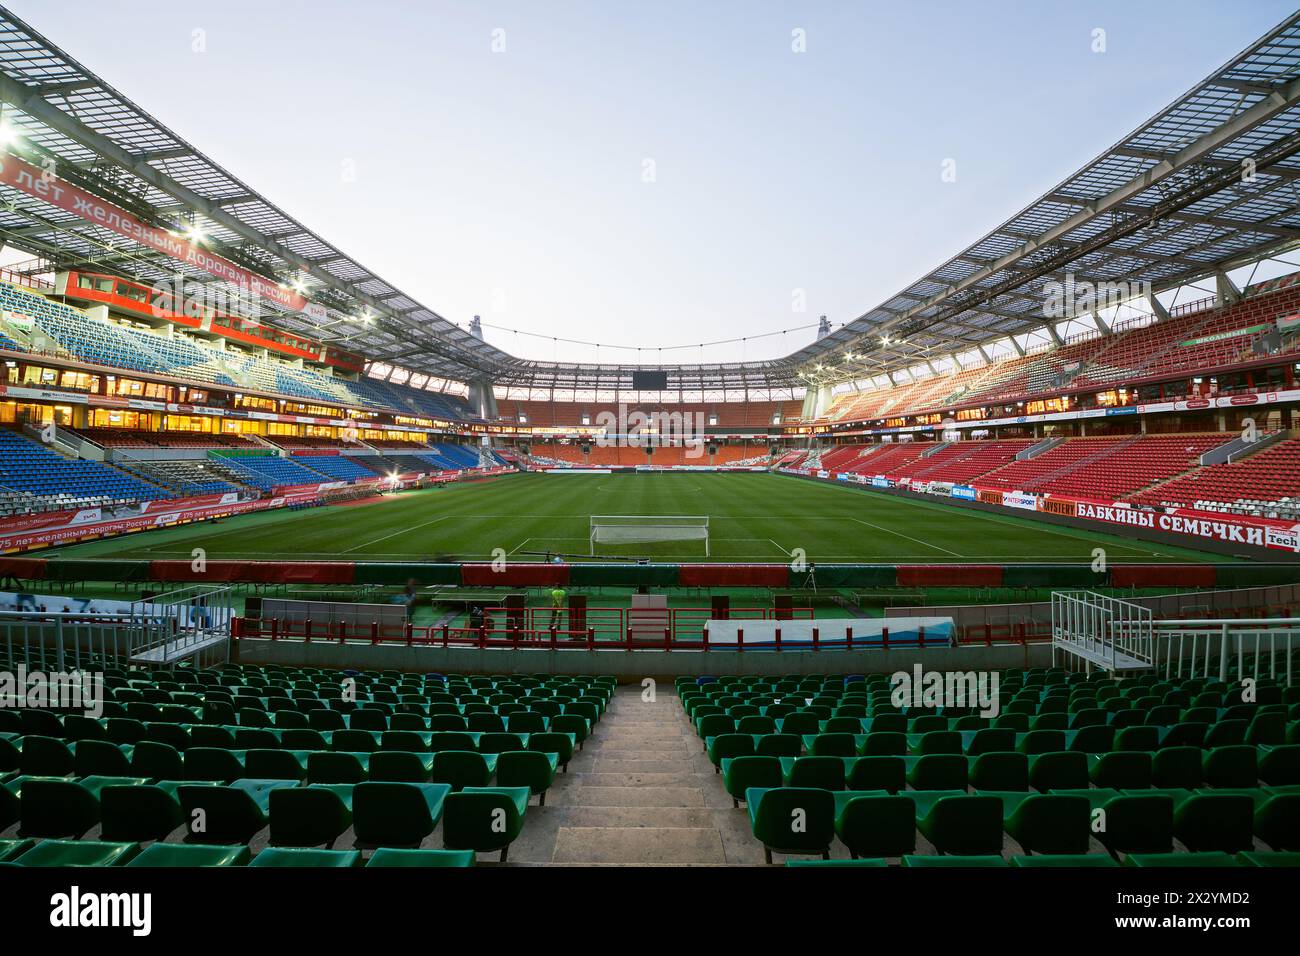 MOSCOW - AUG 15: Empty stadium after the game in the evening on August 15, 2012 in Moscow, Russia. Stock Photo